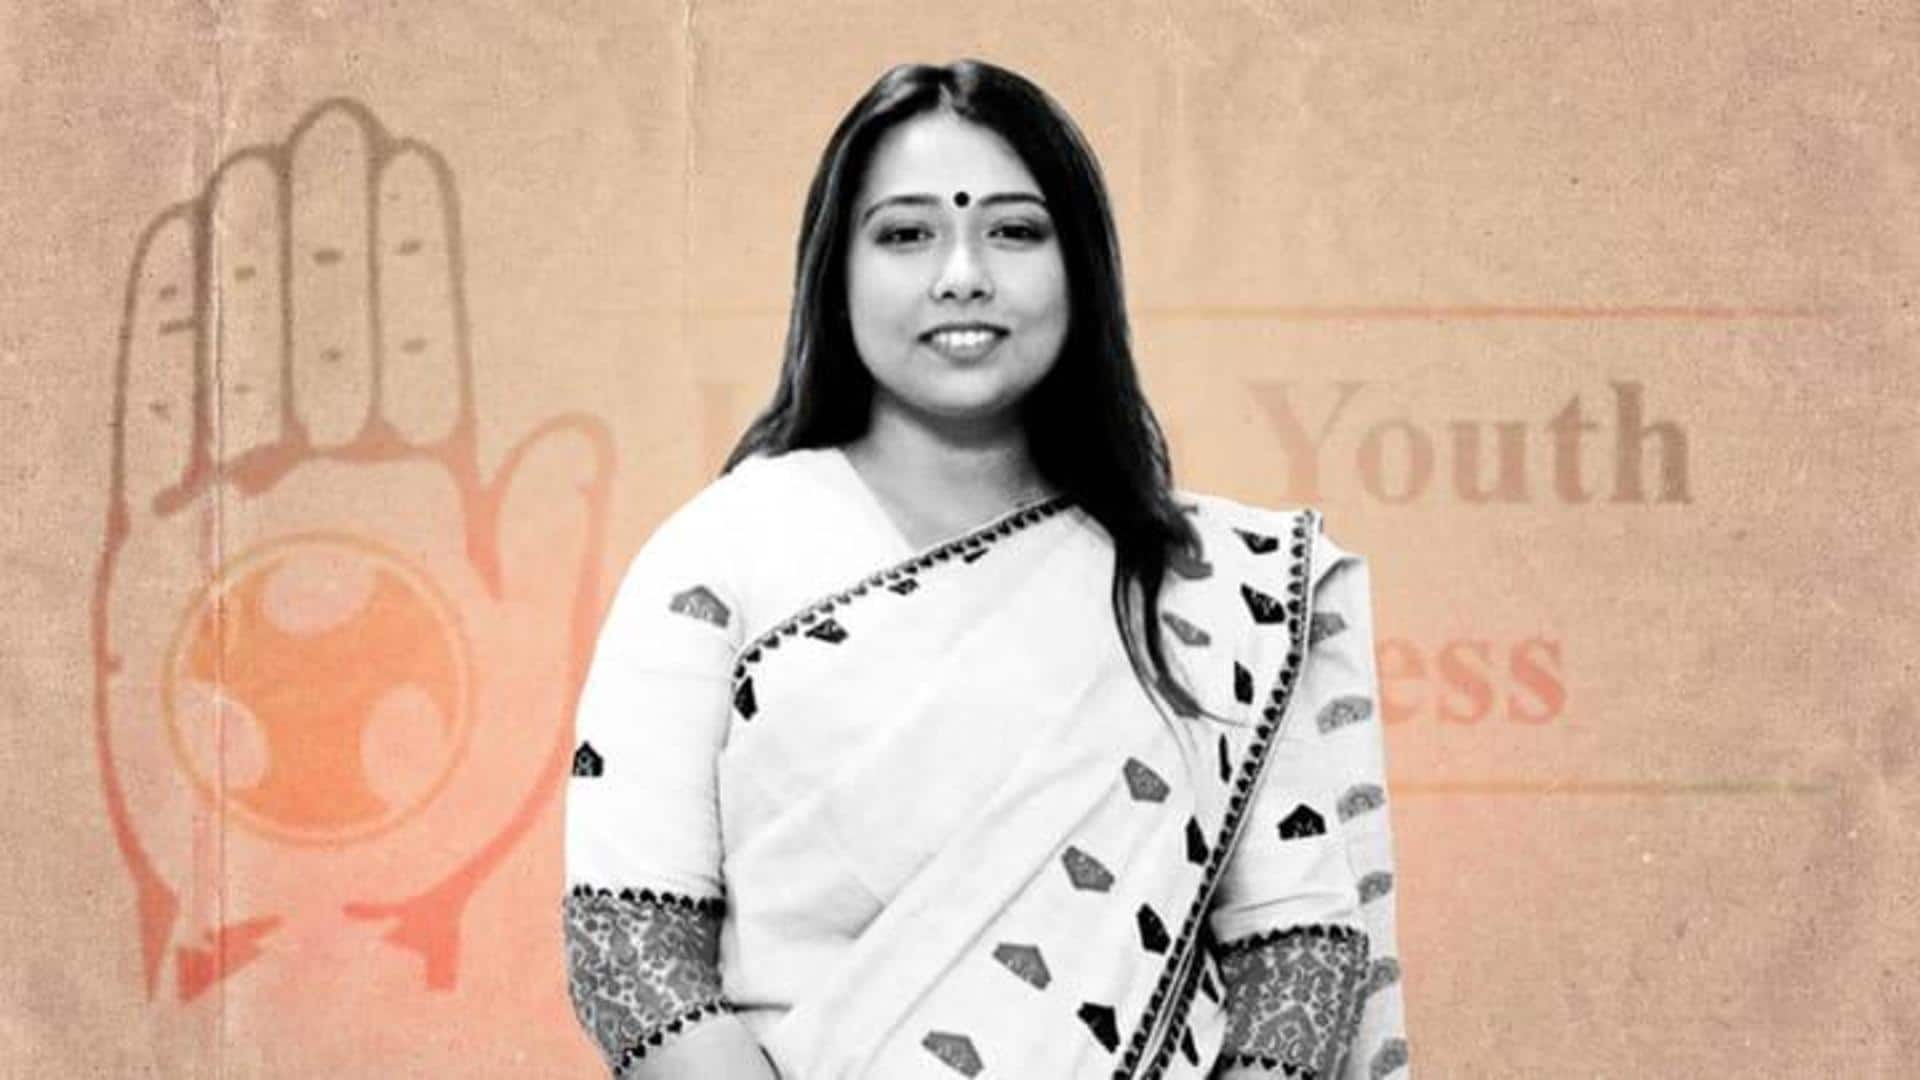 Congress expels ex-Assam youth chief days after she alleged harassment